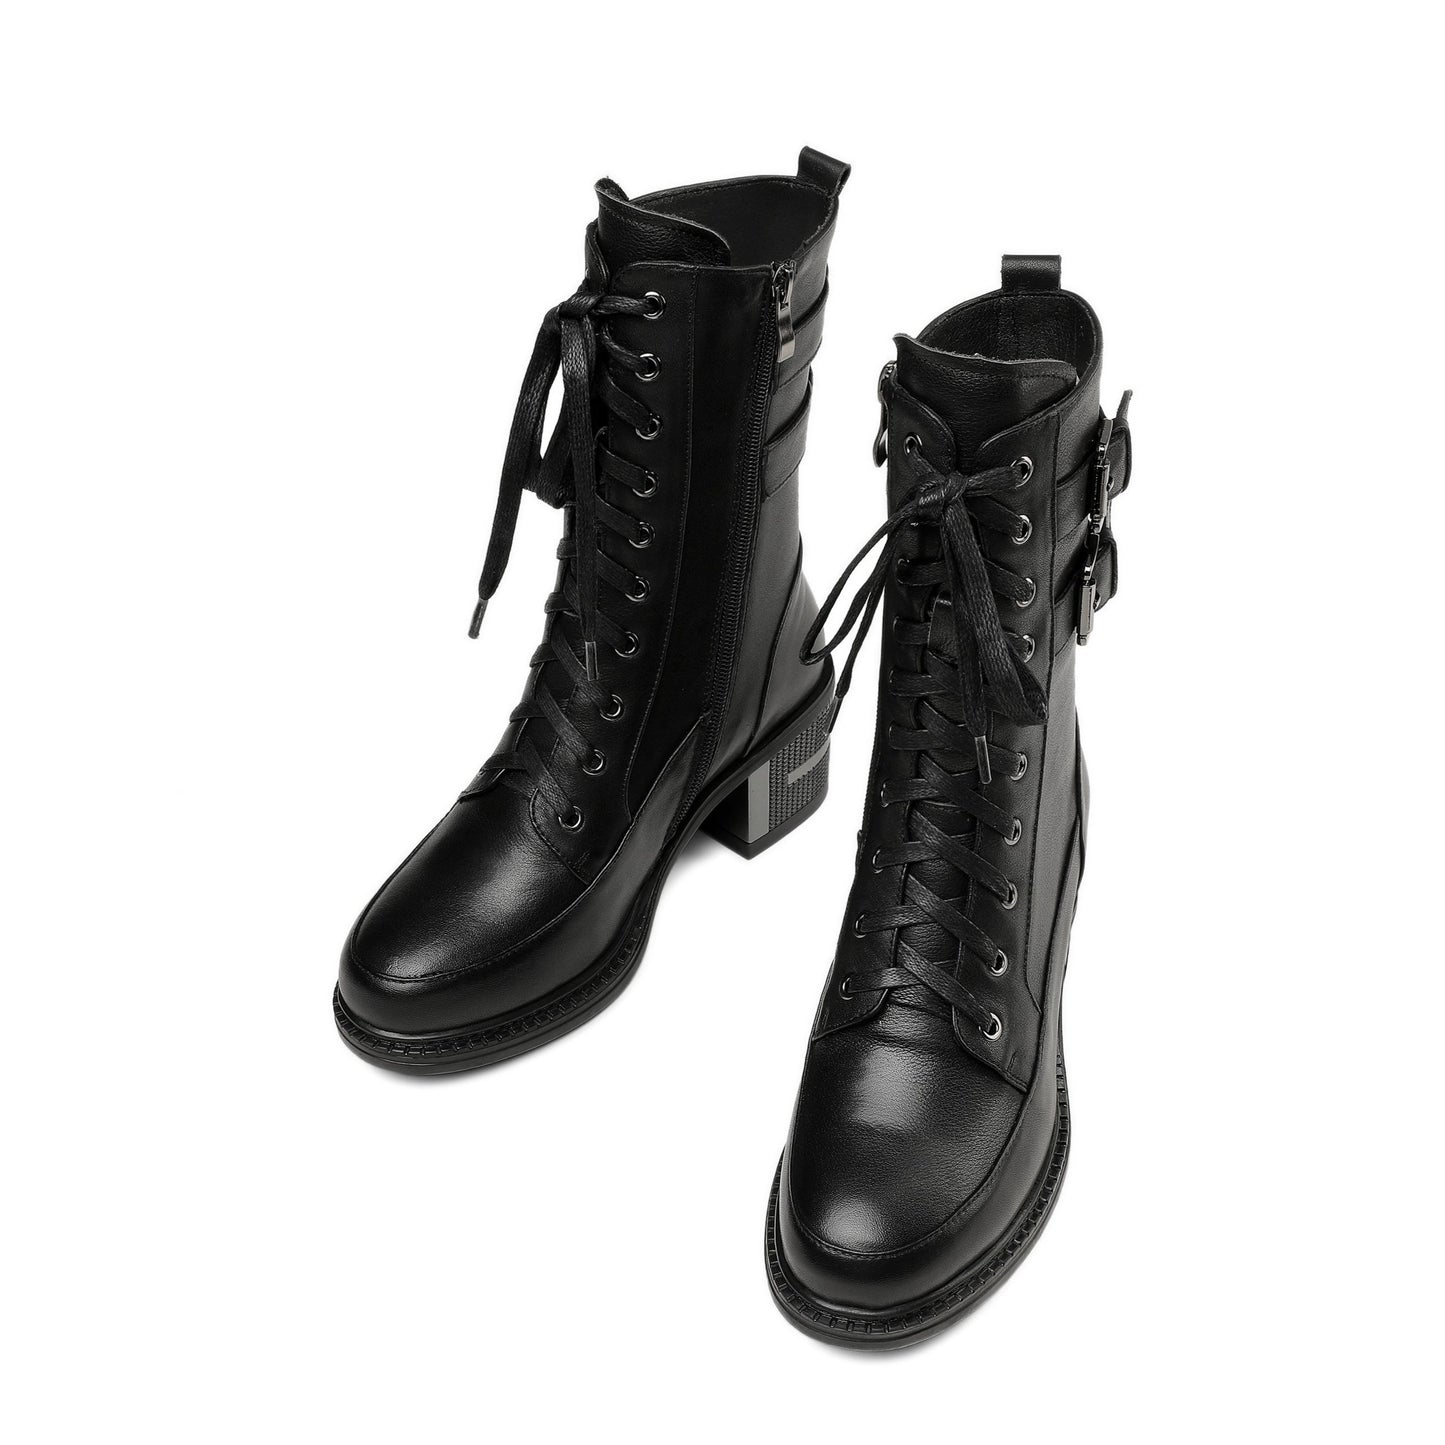 TinaCus Genuine Leather Round Toe Lace Up Side Zipper Handmade Buckles Mid Chunky Heels Stylish Women's Mid-Calf Boots